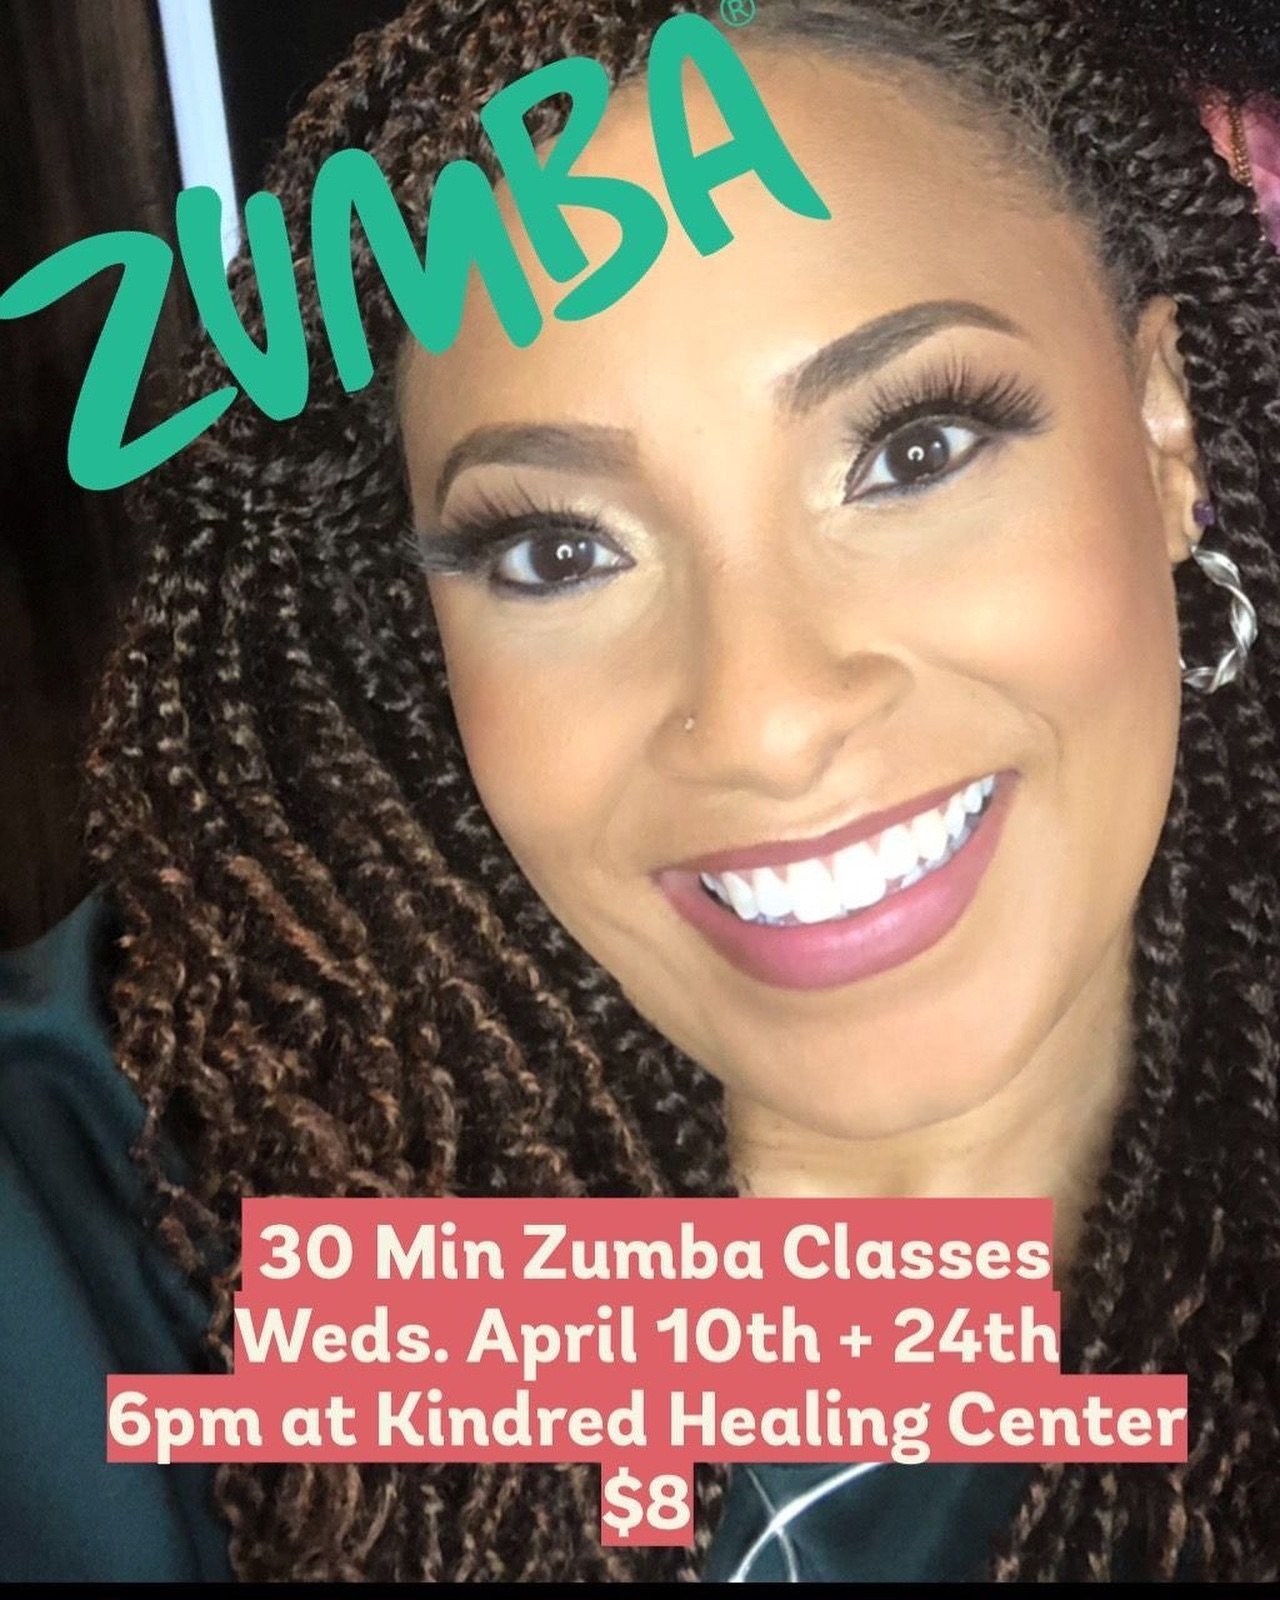 Zumba 
7 pm EVERY WEDNESDAY

Get ready to shake, shimmy, and groove your way to fitness! 

Kindred Healing Center is excited to announce our NEW WEDNESDAY ZUMBA CLASS led by the joyfully energetic Misty Oaks Paxton!

Whether you&rsquo;re a Zumba pro 